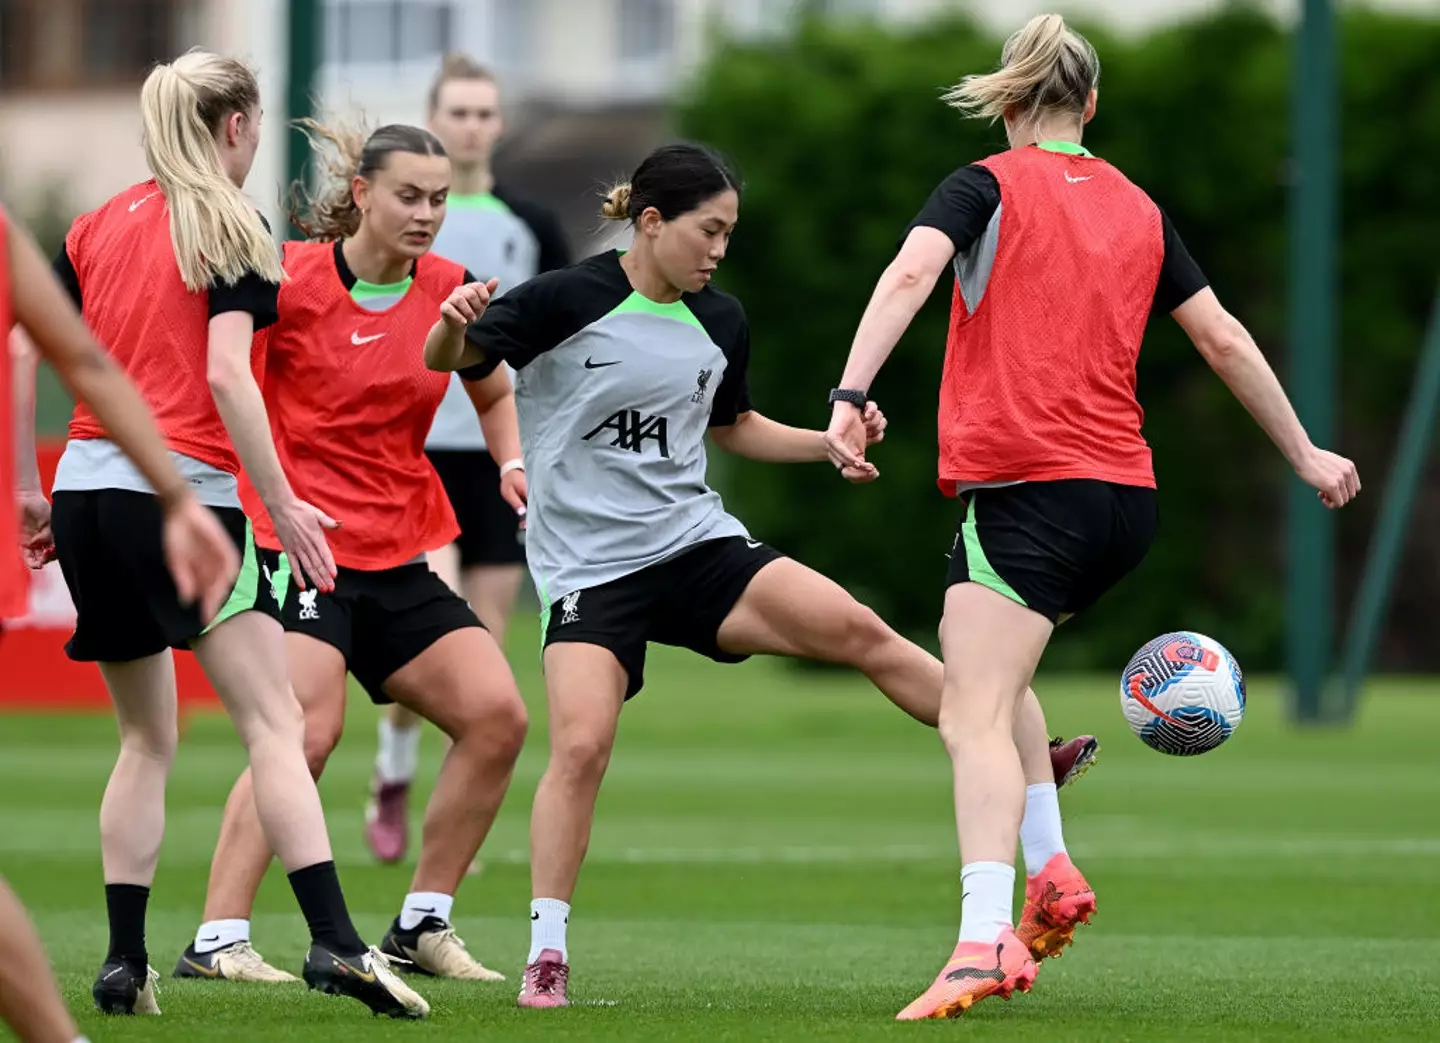 Liverpool Women currently train at Melwood (